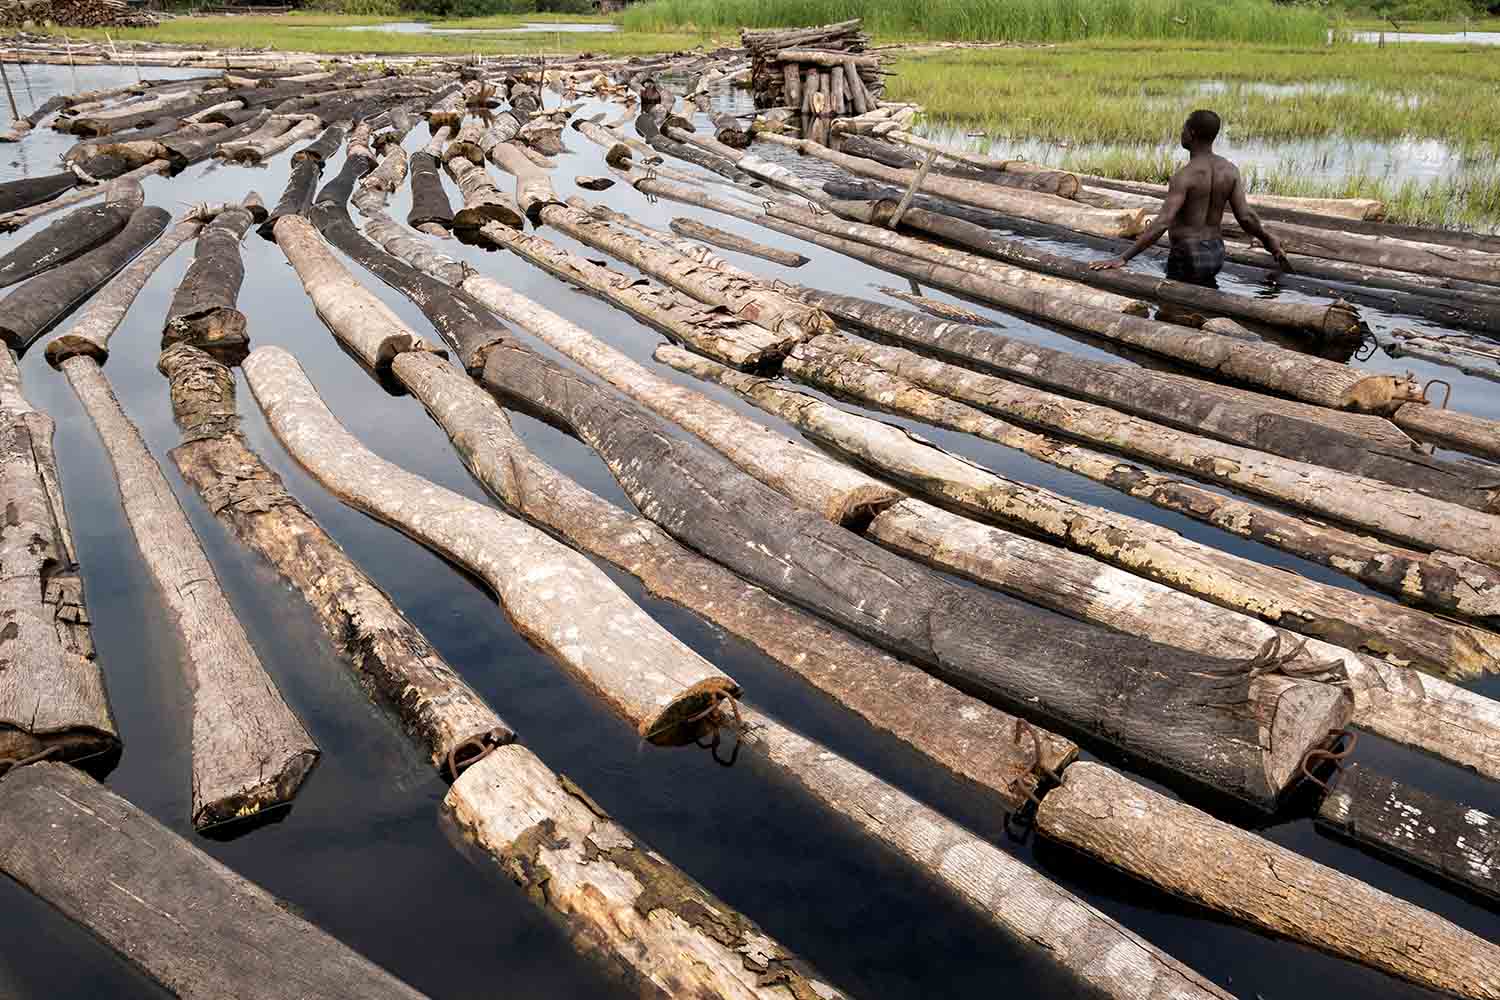 Logger, Komiyo Ikuejamoye, arranges logs on the river in Ipare, Ondo State, Nigeria, October 11, 2021. After felling the trees and cross-cutting them, the loggers pull the logs out of the flooded forest floor onto the river, where they will eventually be hammered into rafts, ready for transportation to Lagos state. REUTERS/Nyancho NwaNri